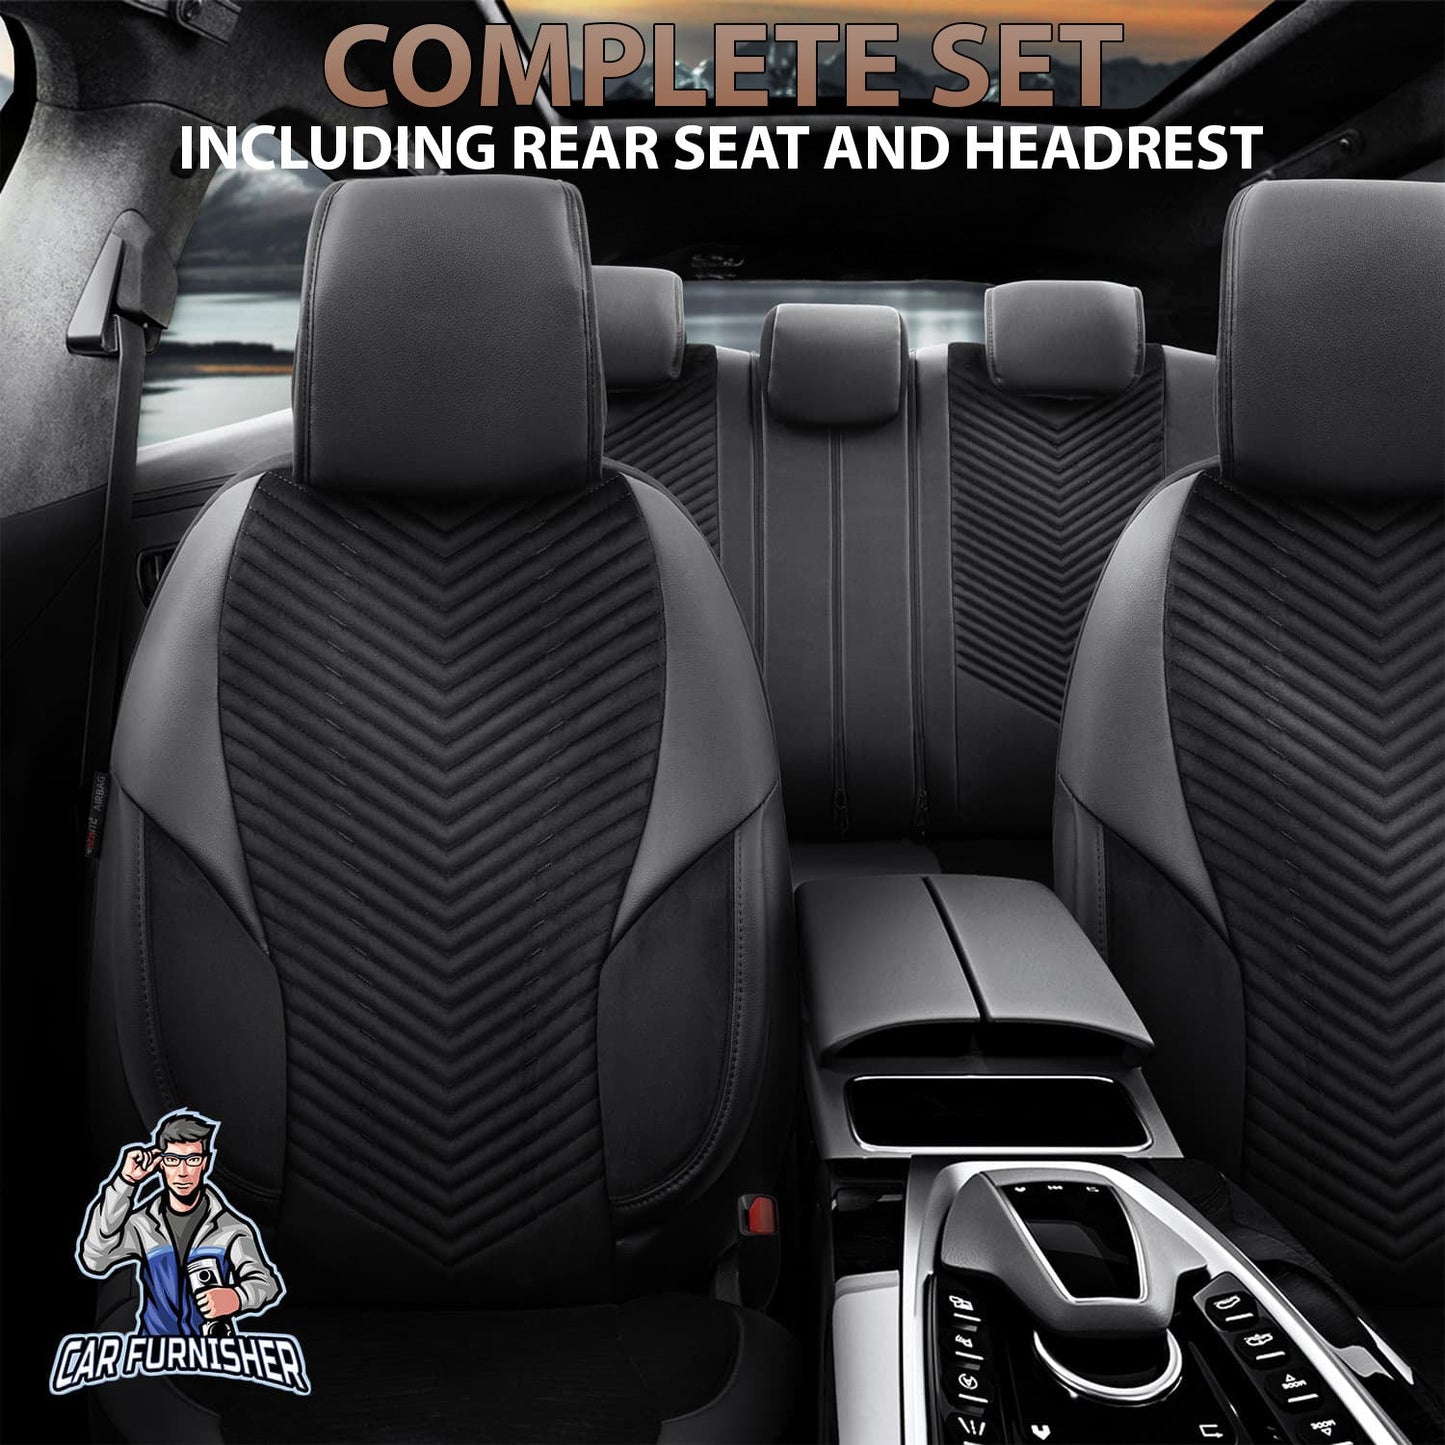 Volkswagen Jetta Seat Covers Advanced Babyface Design Black 5 Seats + Headrests (Full Set) Leather & Suede Fabric